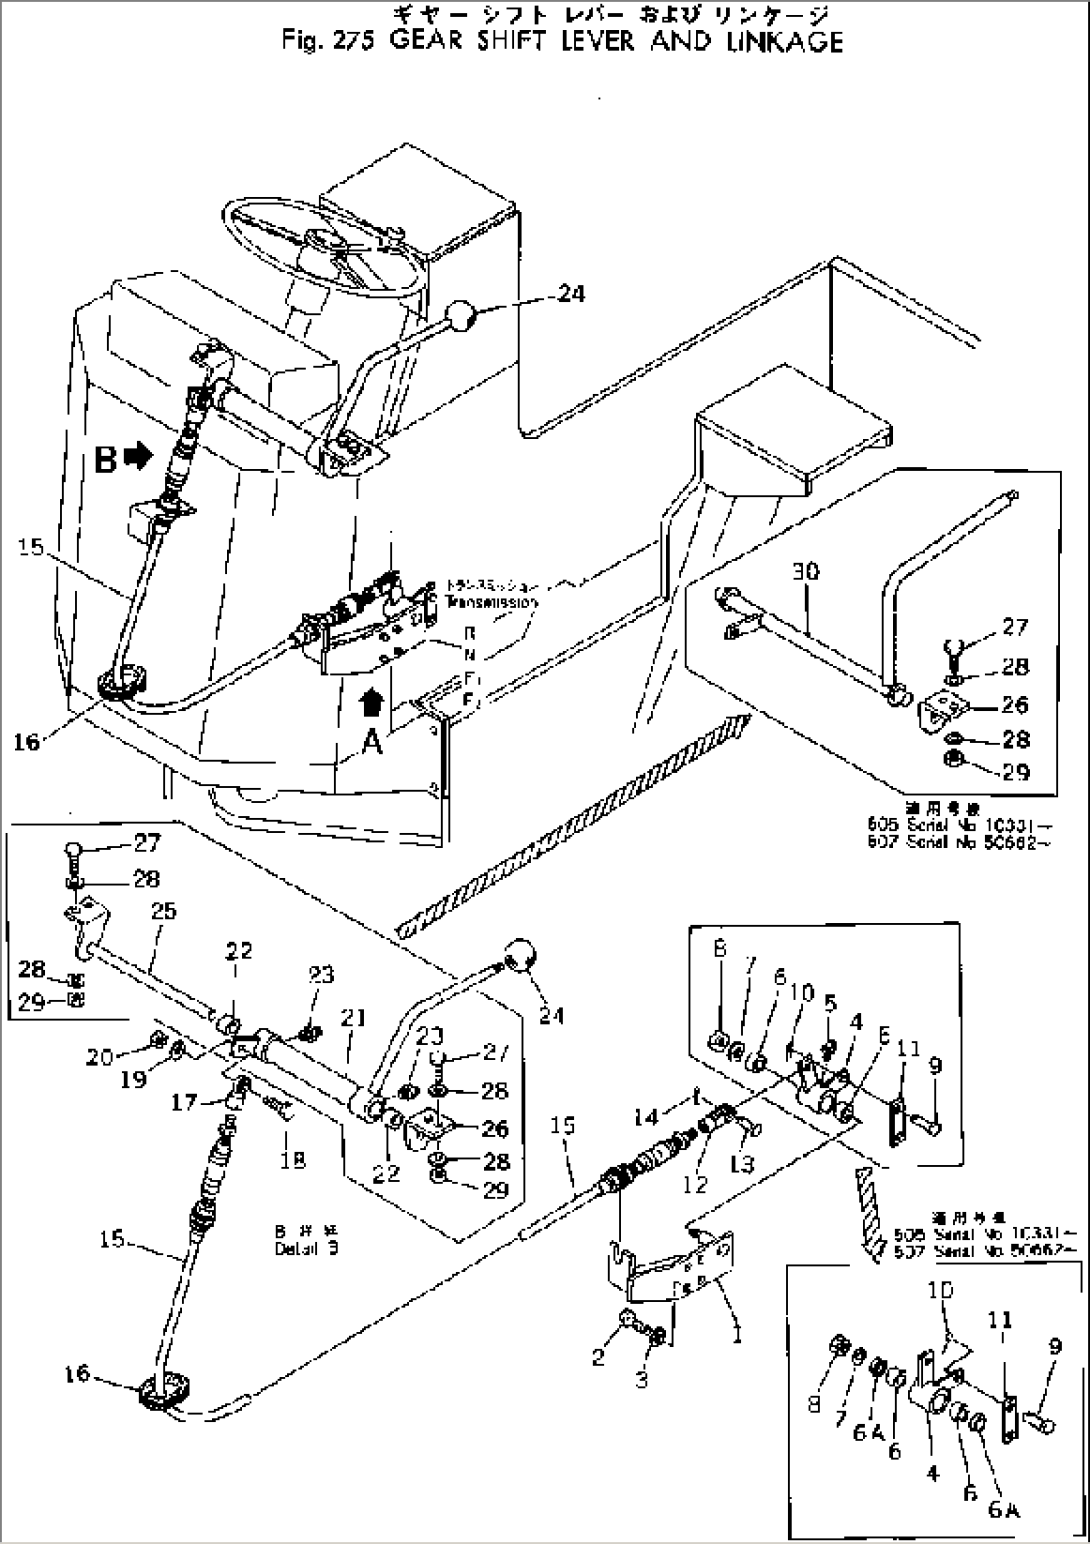 GEAR SHIFT LEVER AND LINKAGE